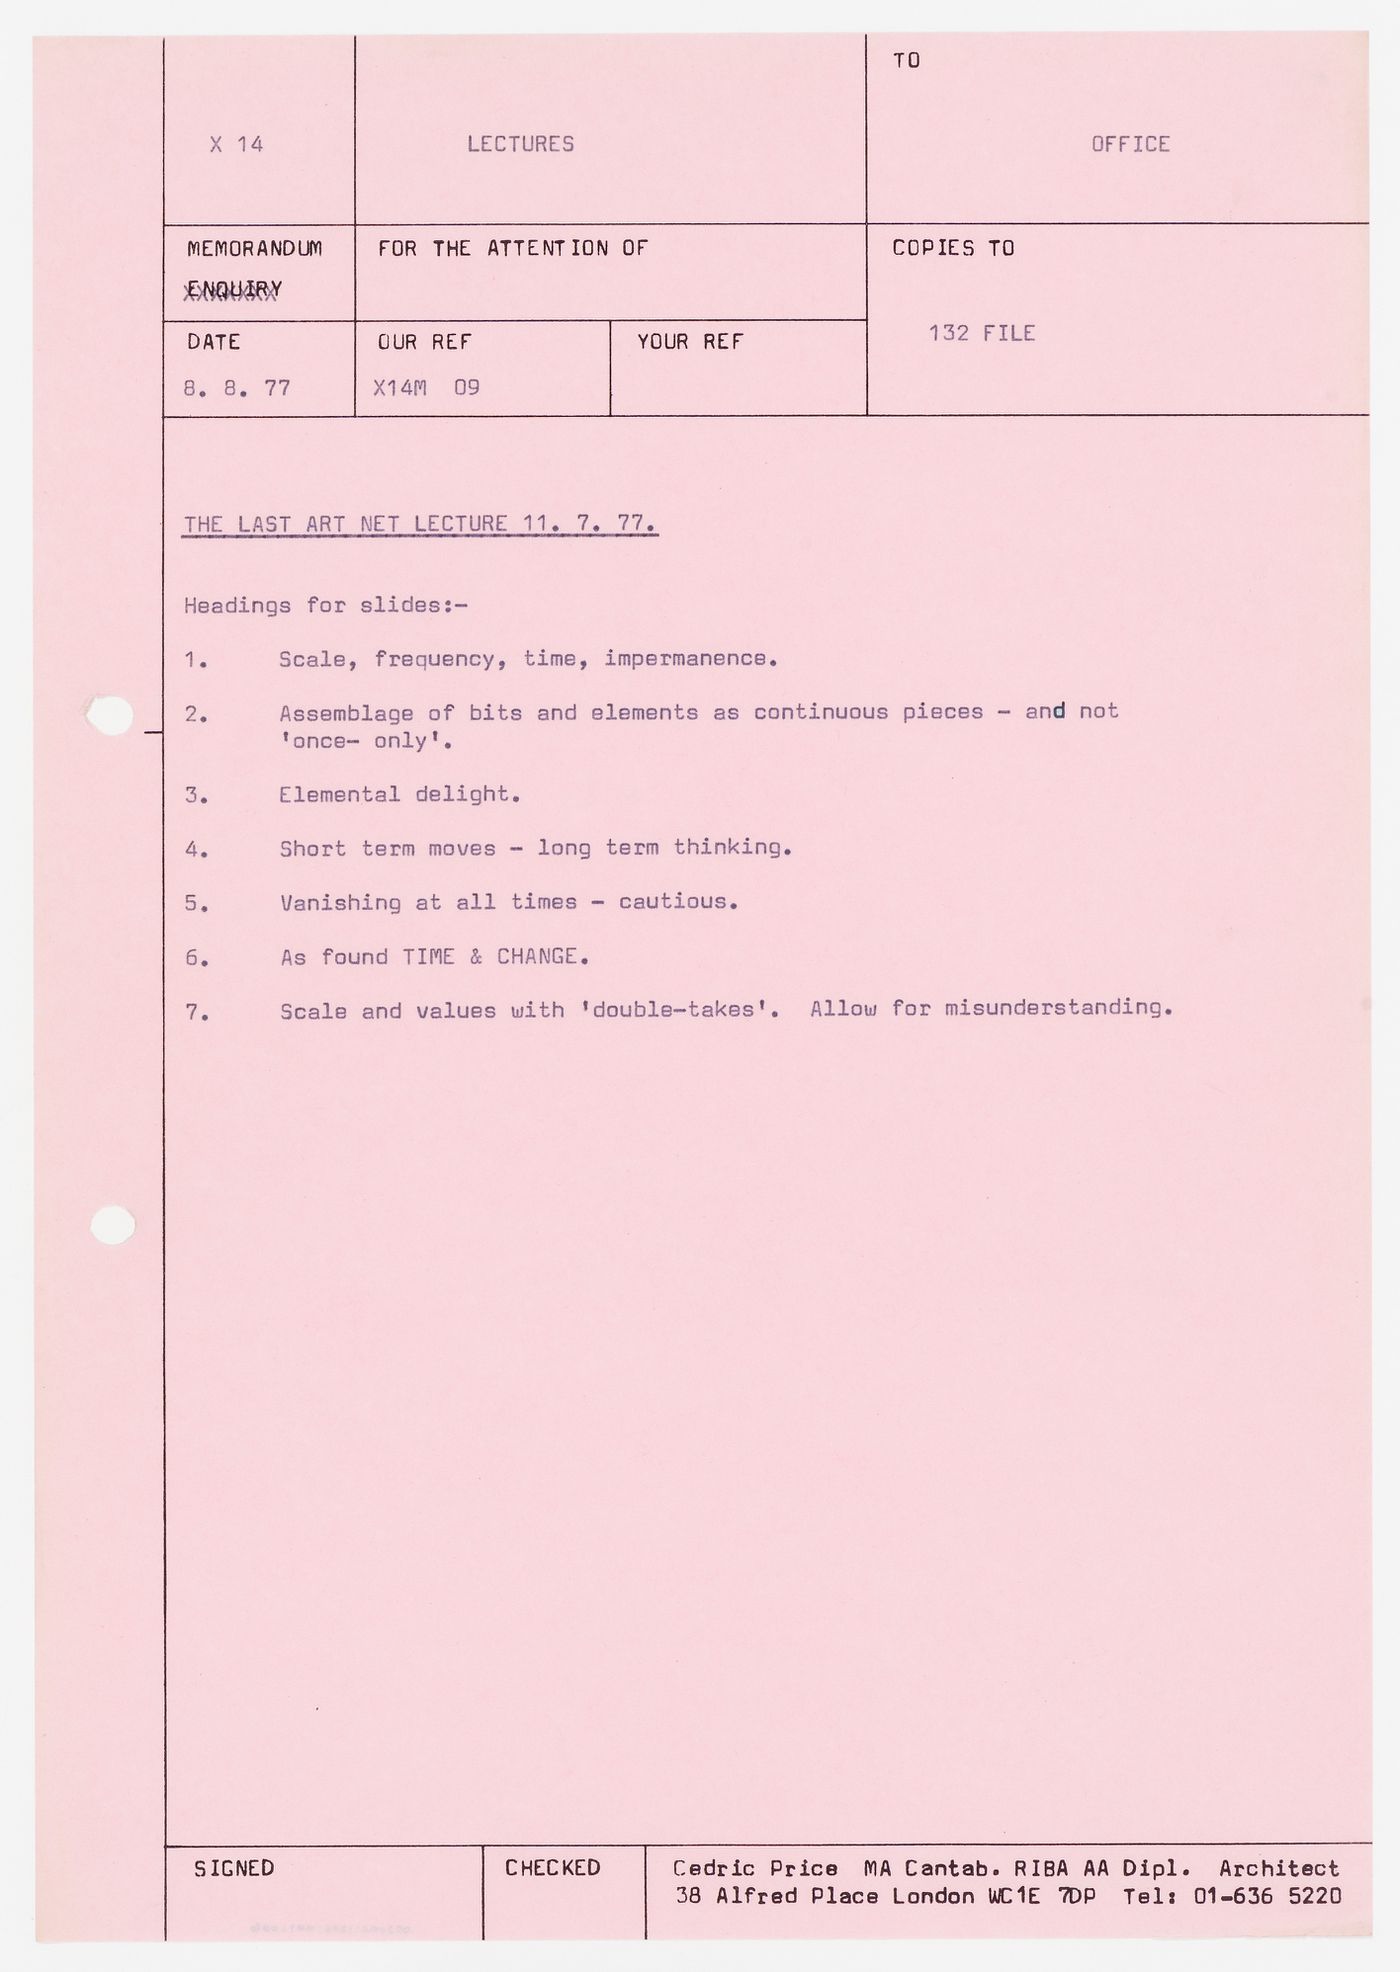 Memorandum to Office about lecture presented at Art Net, July 11, 1977